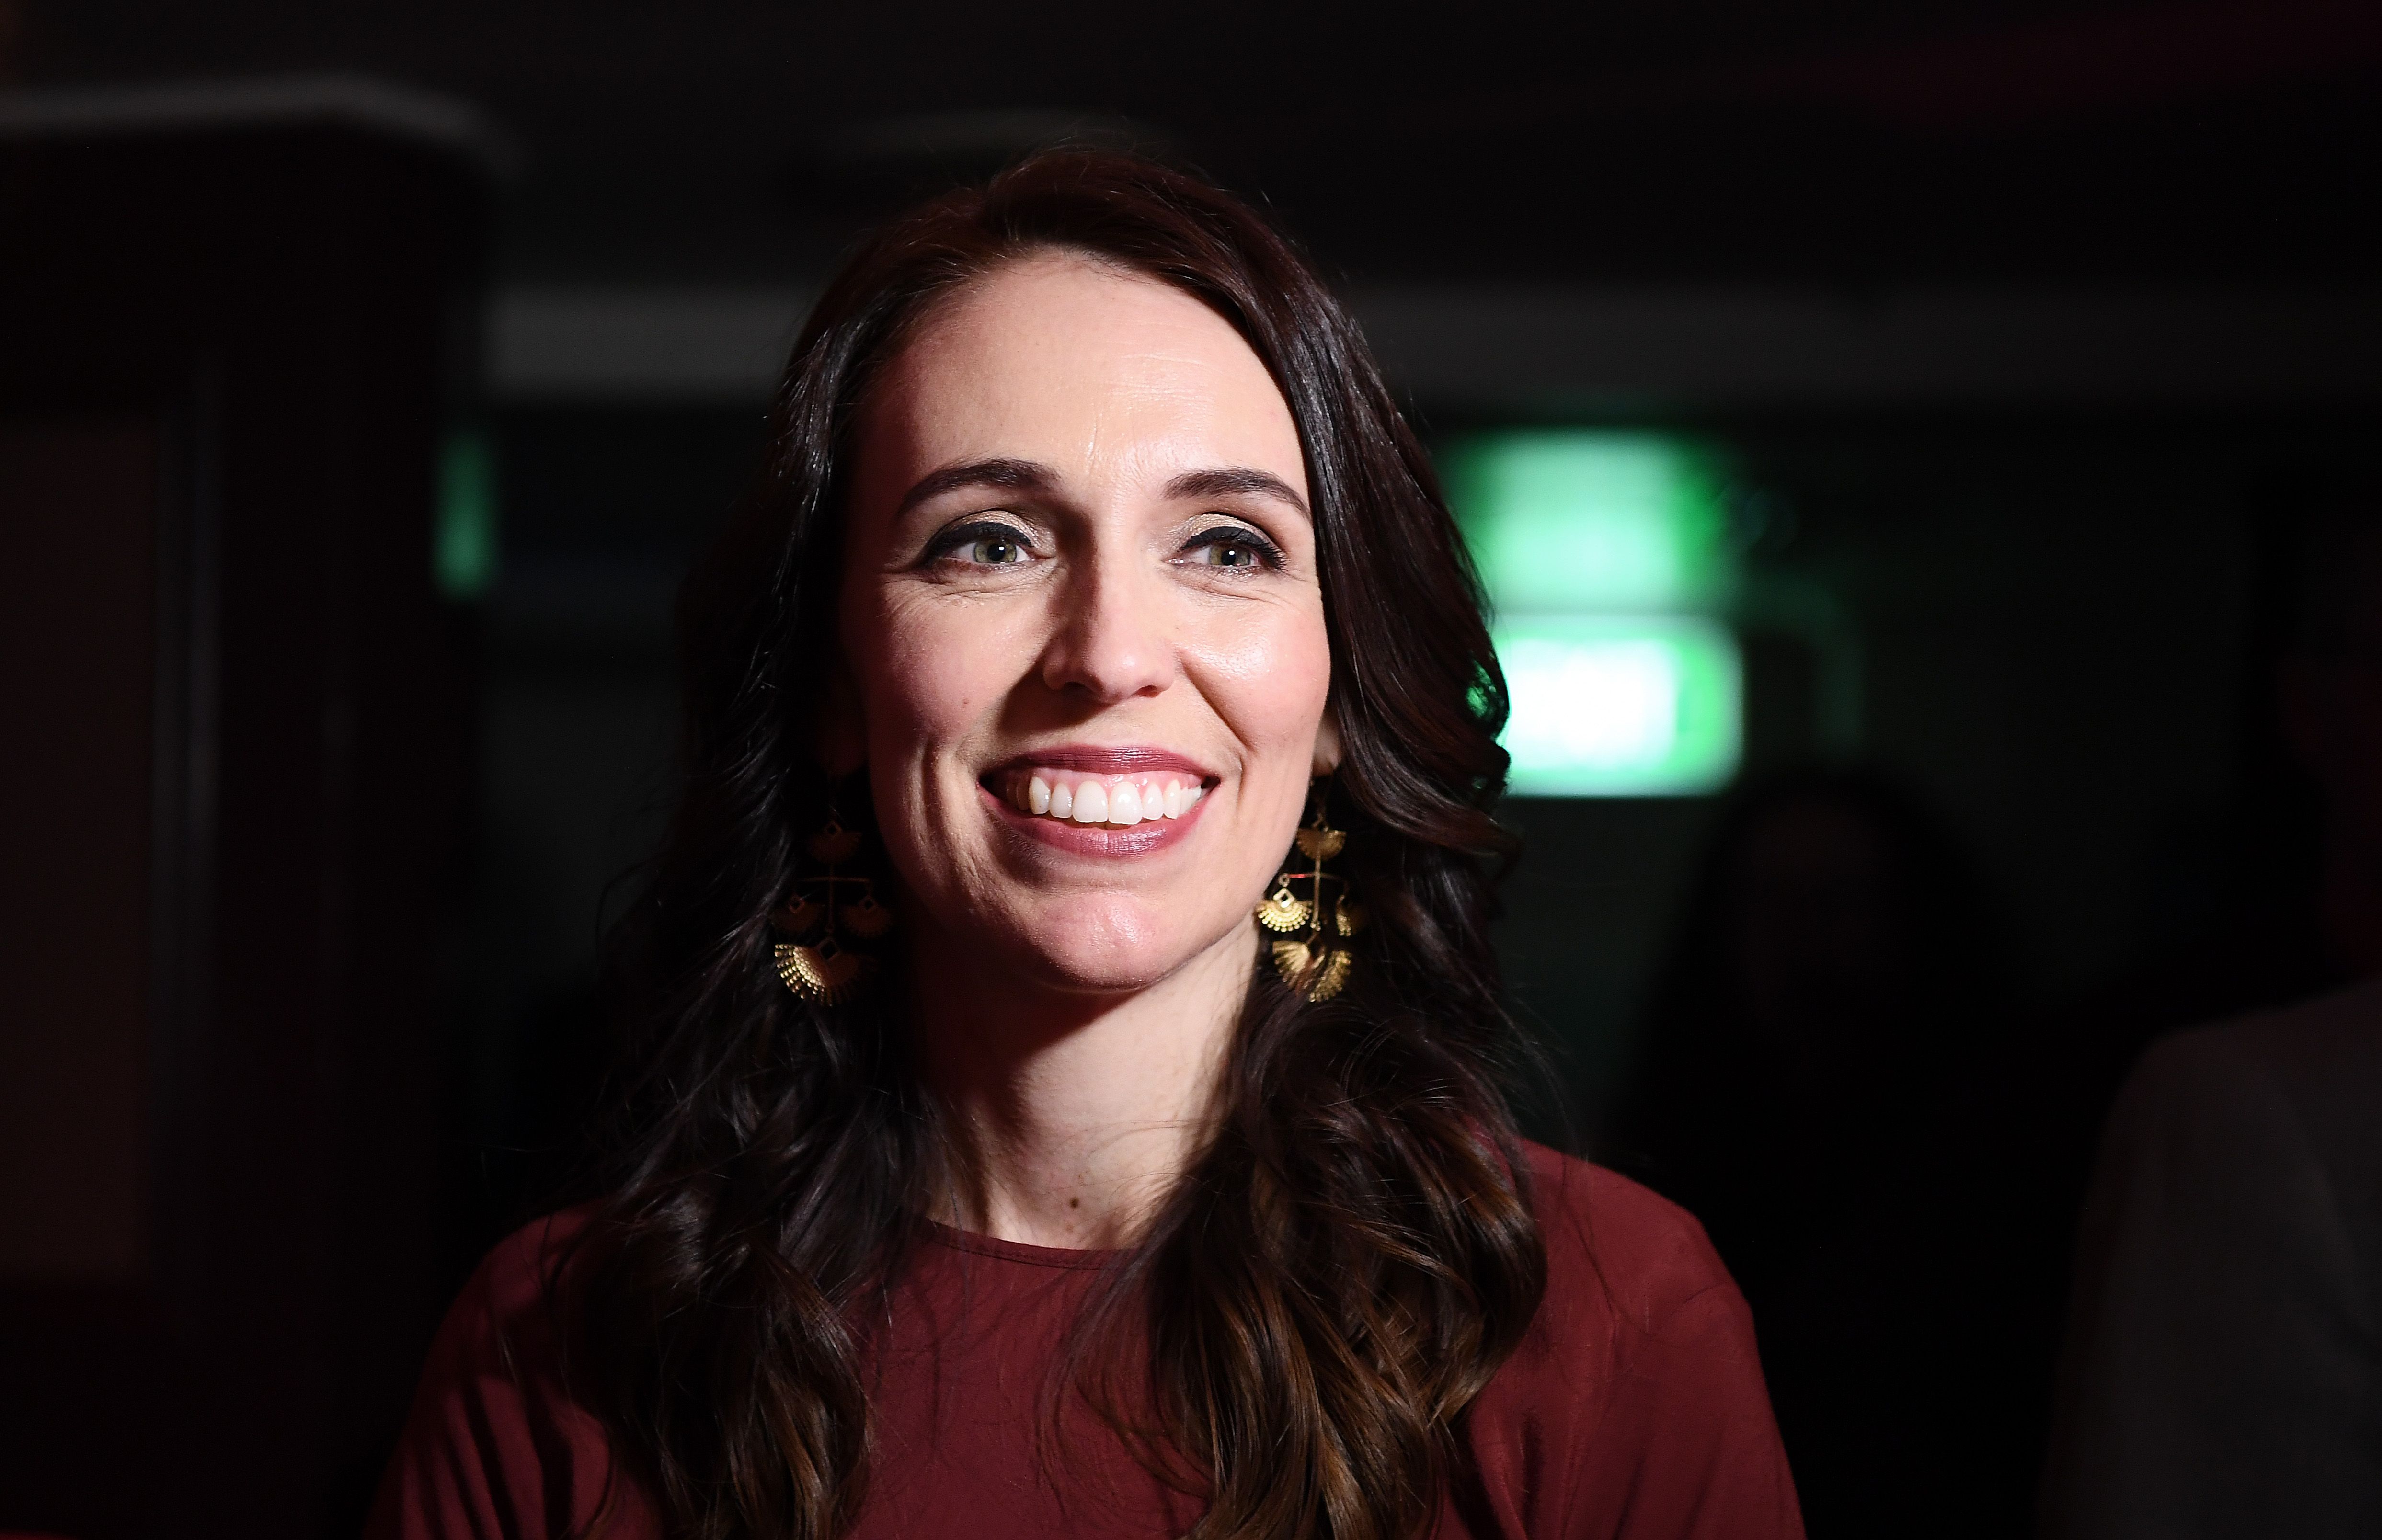 [BREAKING] New Zealand PM Jacinda Ardern Earned Landslide Victory in the Second Term Election